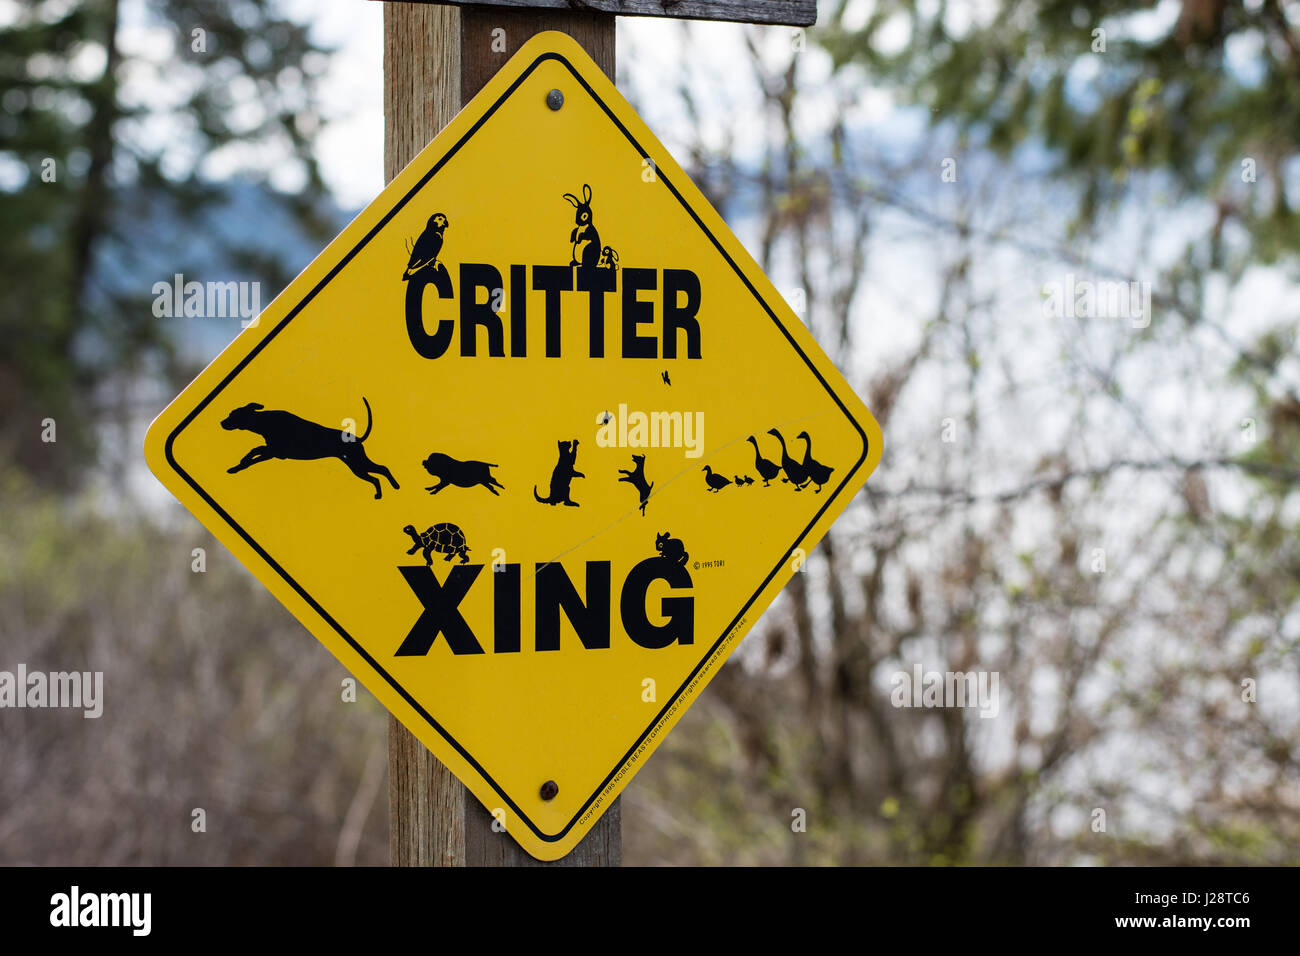 Yellow critter crossing sign post on rural lakeside road. Stock Photo